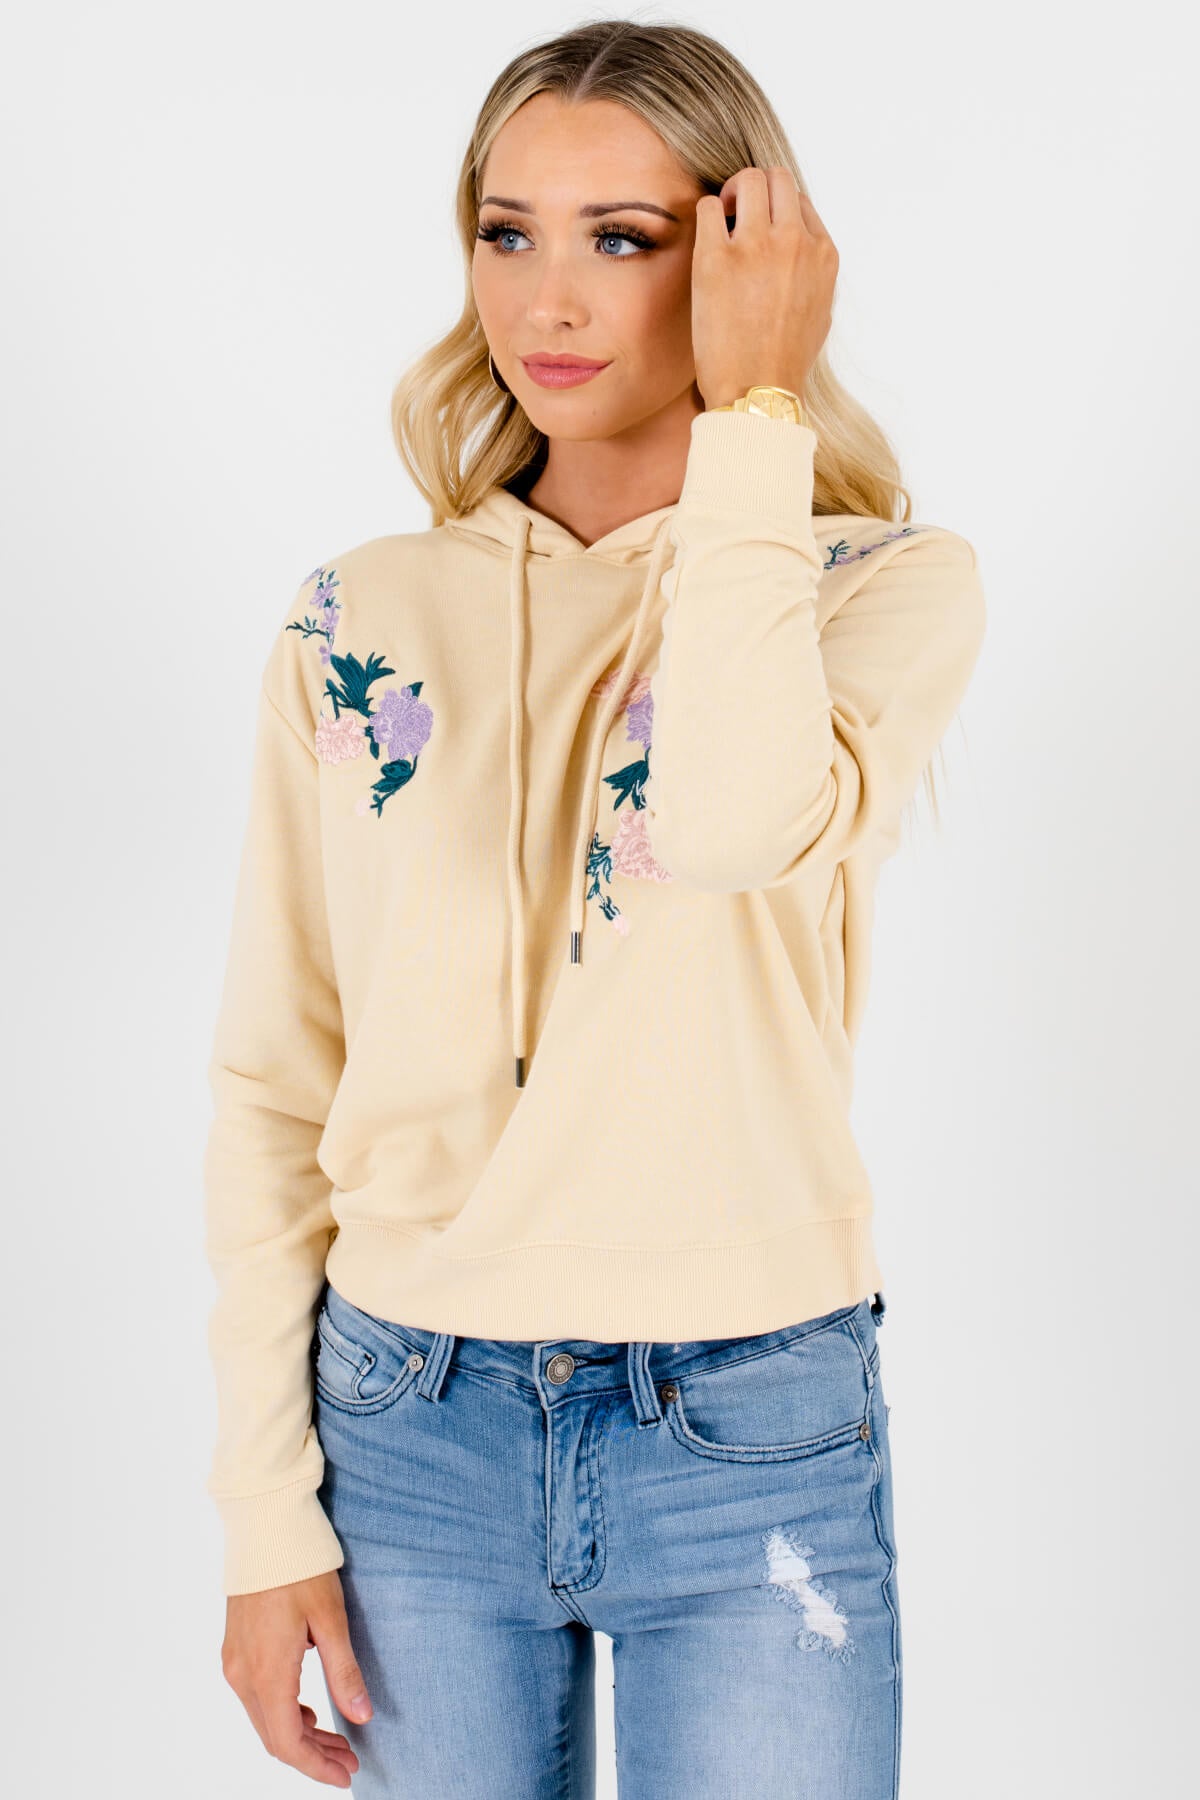 Light Yellow Cute Floral Embroidery Hoodies for Women